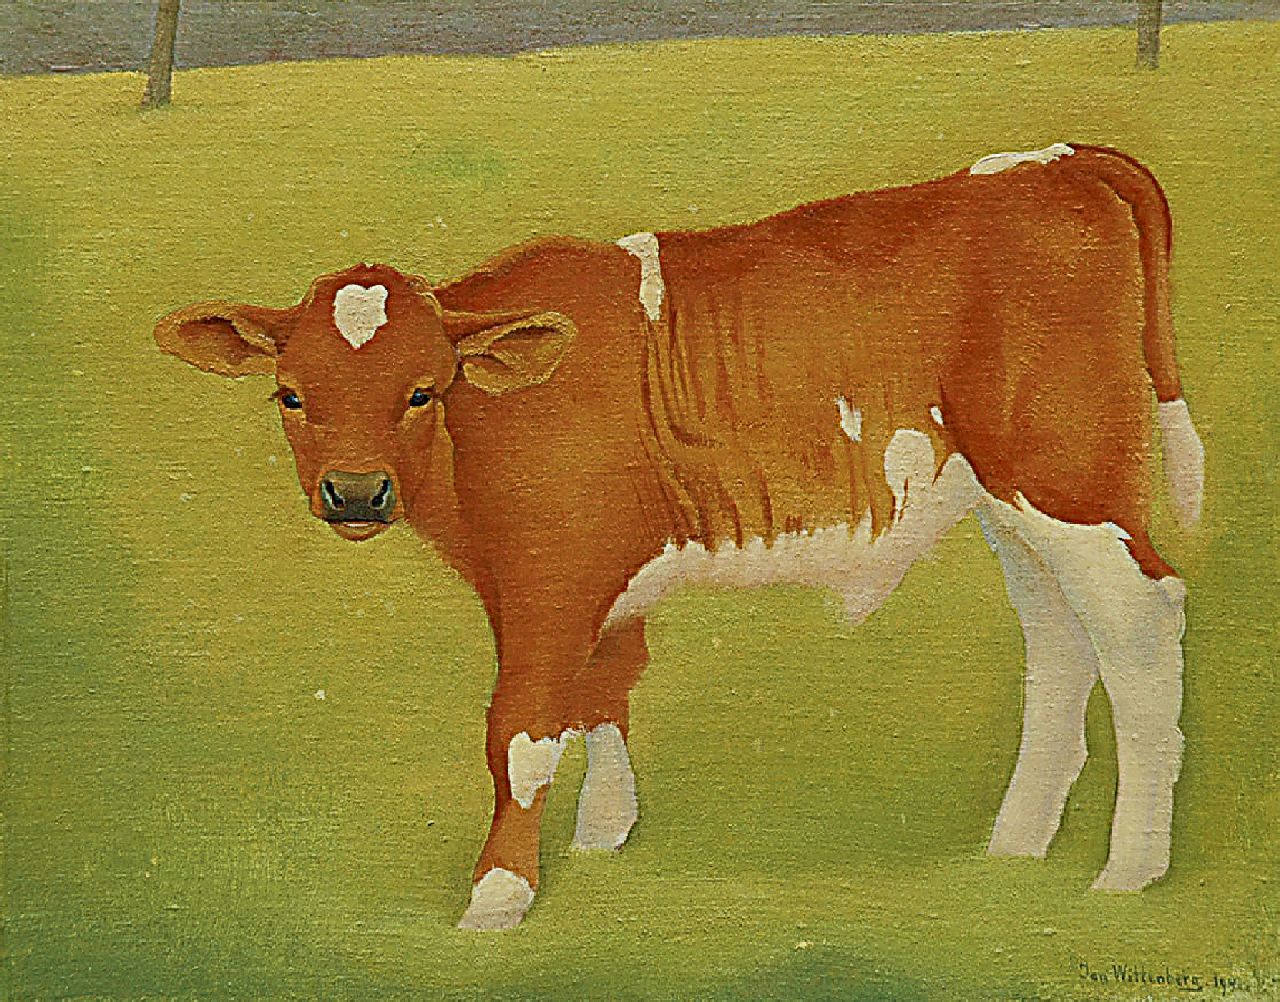 Wittenberg J.H.W.  | 'Jan' Hendrik Willem Wittenberg, A calf in a meadow, oil on canvas laid down on panel 23.6 x 30.2 cm, signed l.r. and dated 1941